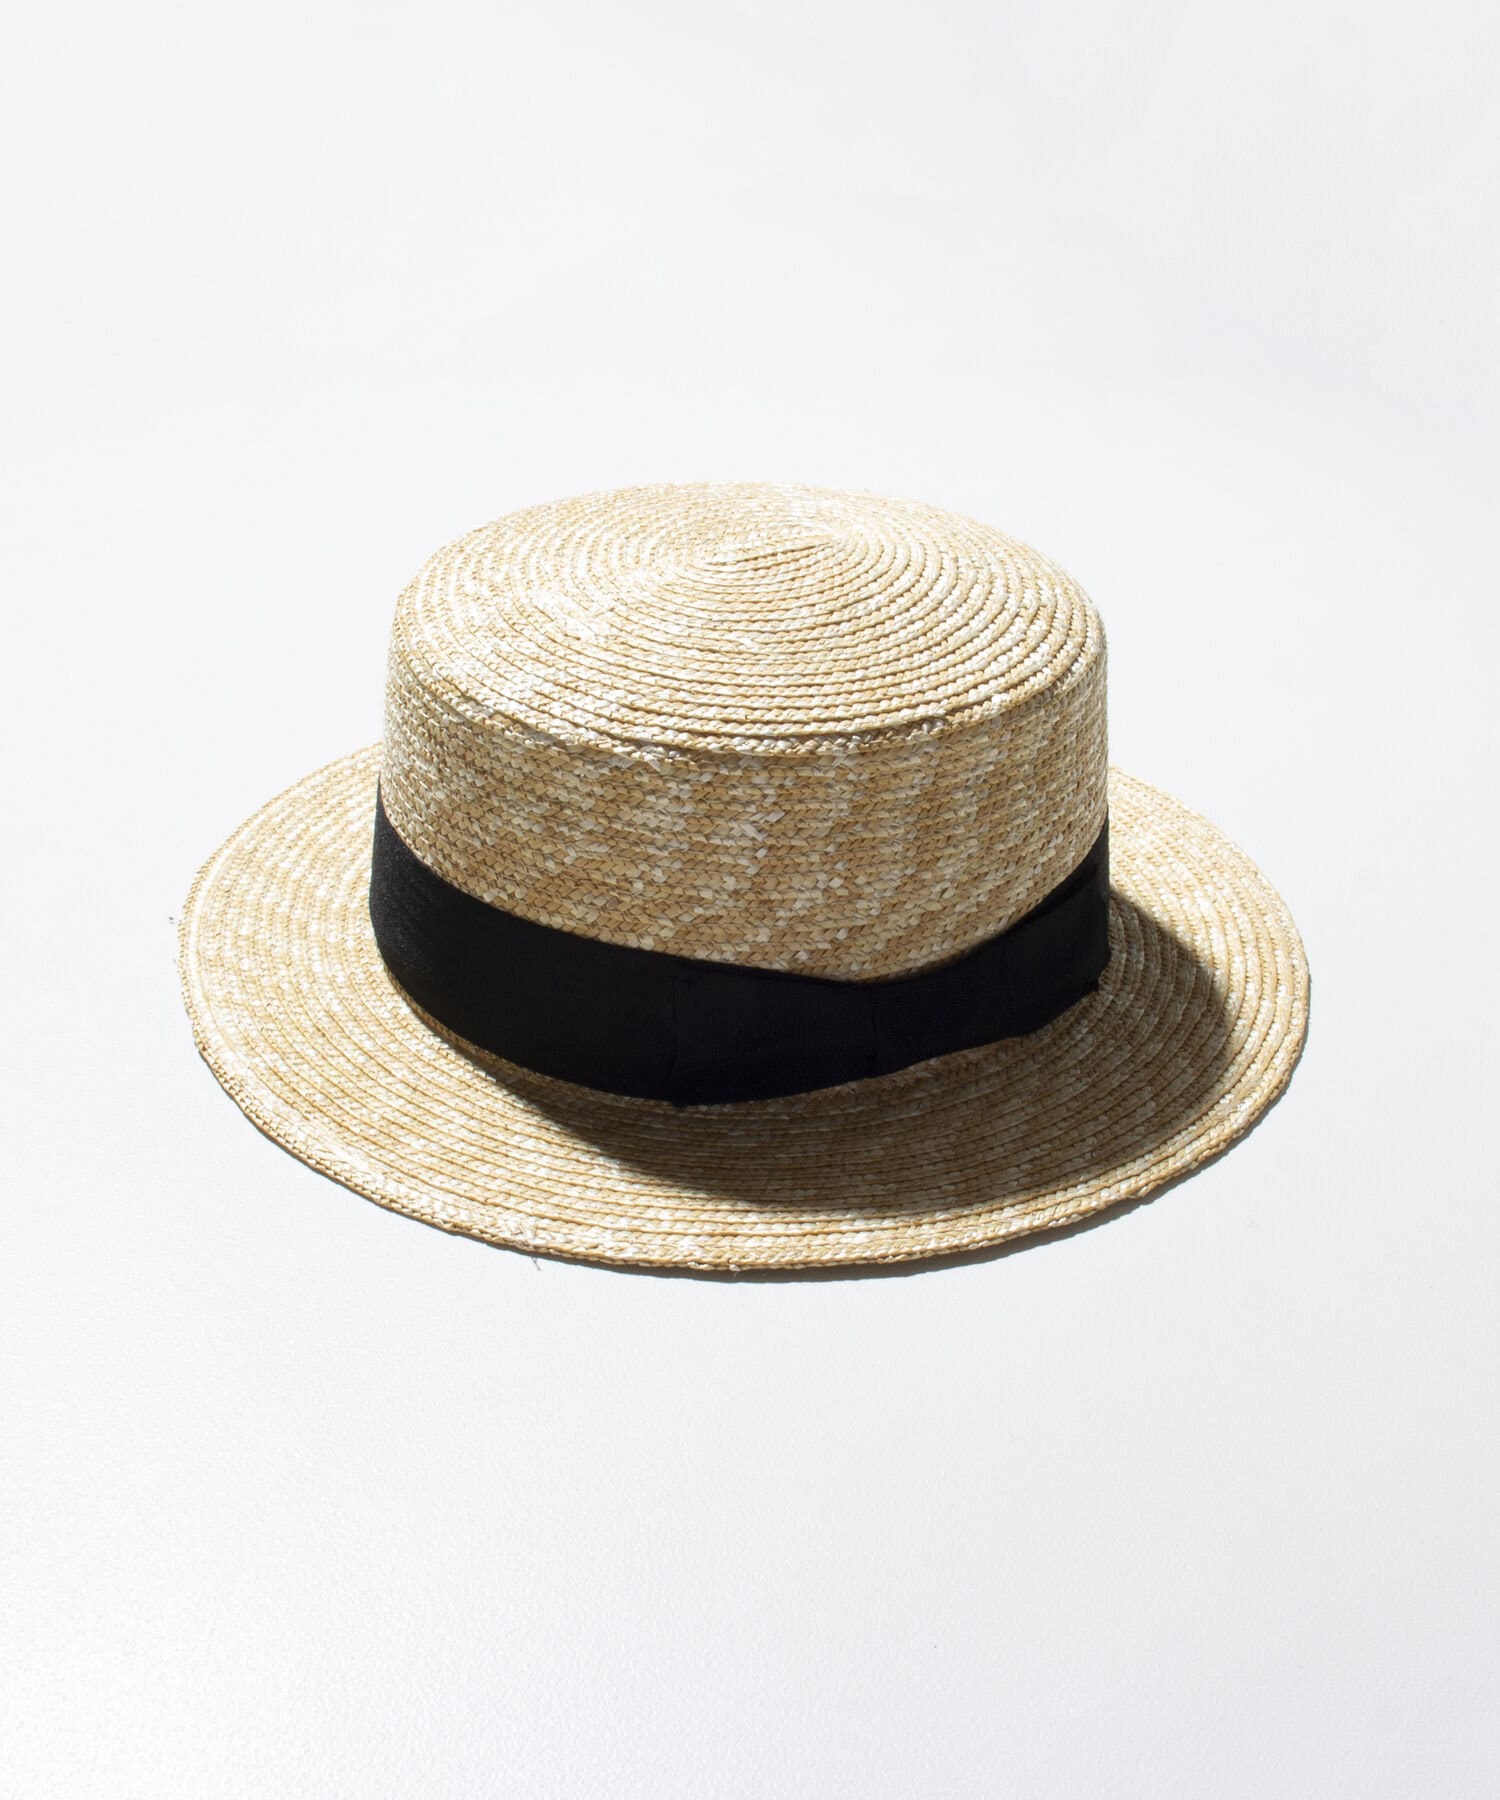 GLOSTER】STRAW BOATER HAT 麦わら カンカン帽 | FREDY & GLOSTER